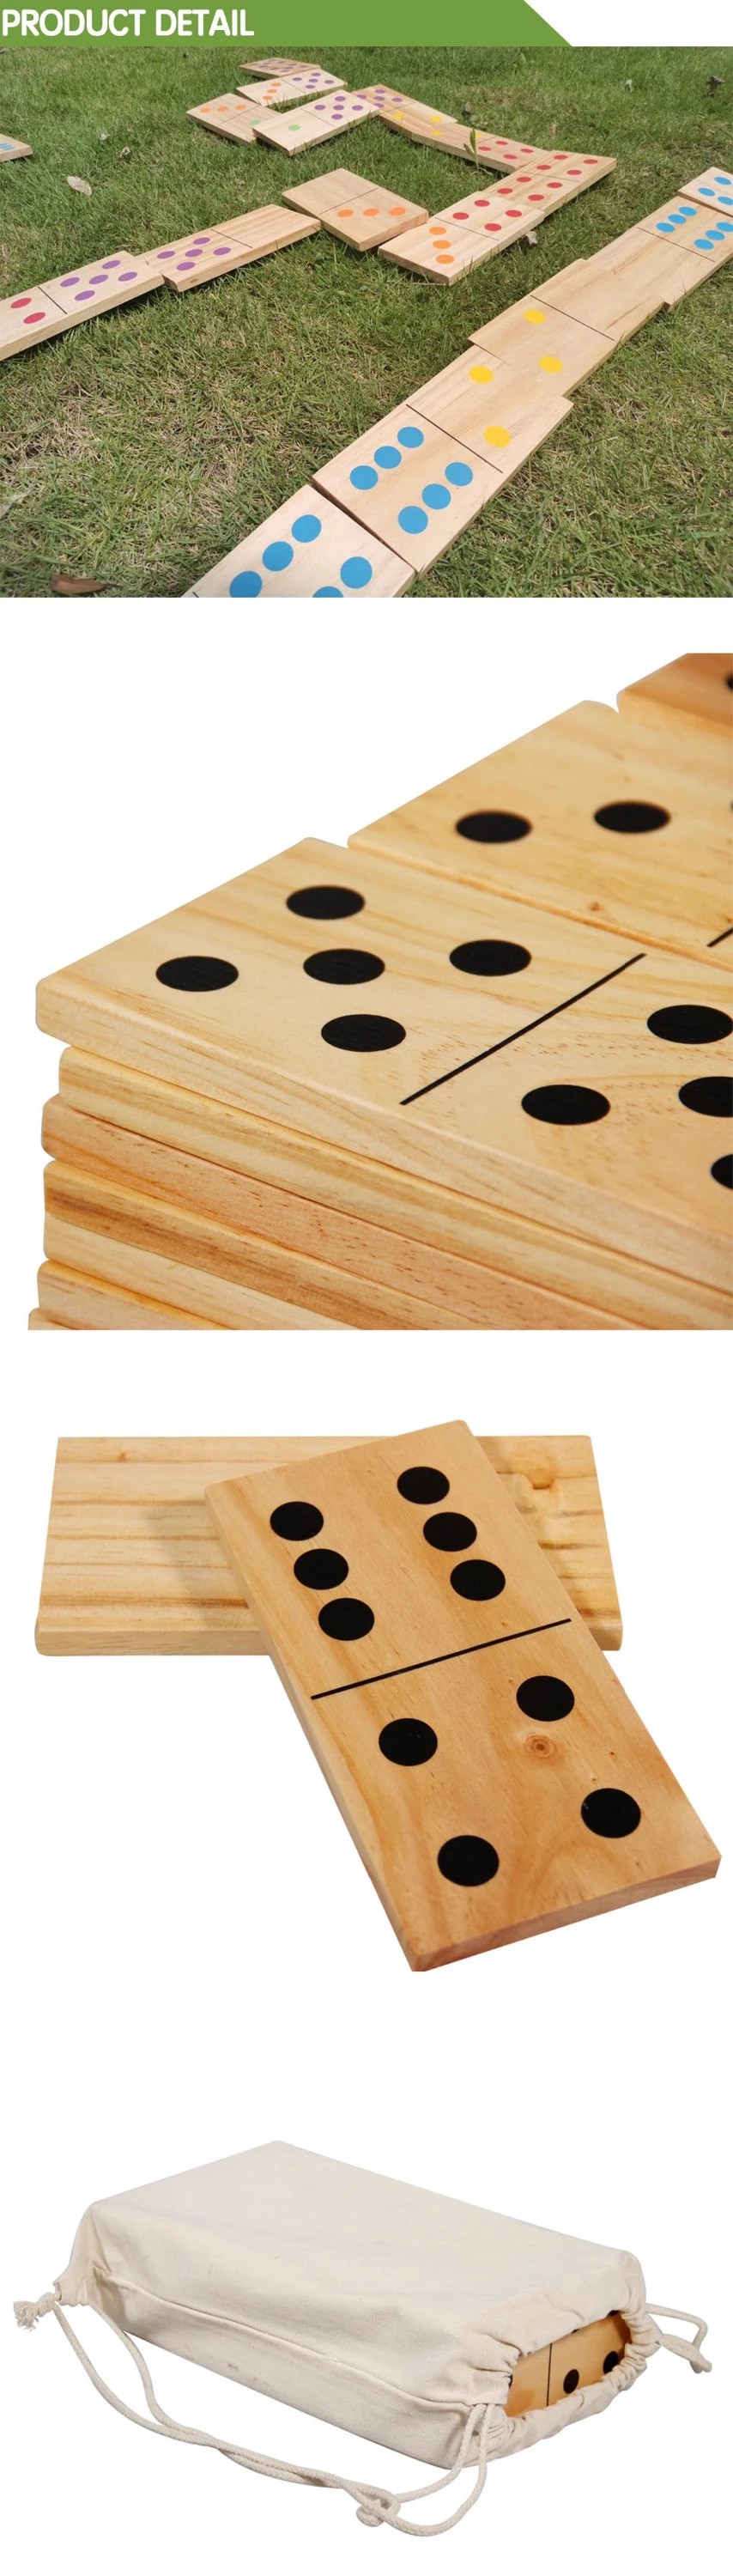 EASTOMMY Wood Domino Game Toy Set 6